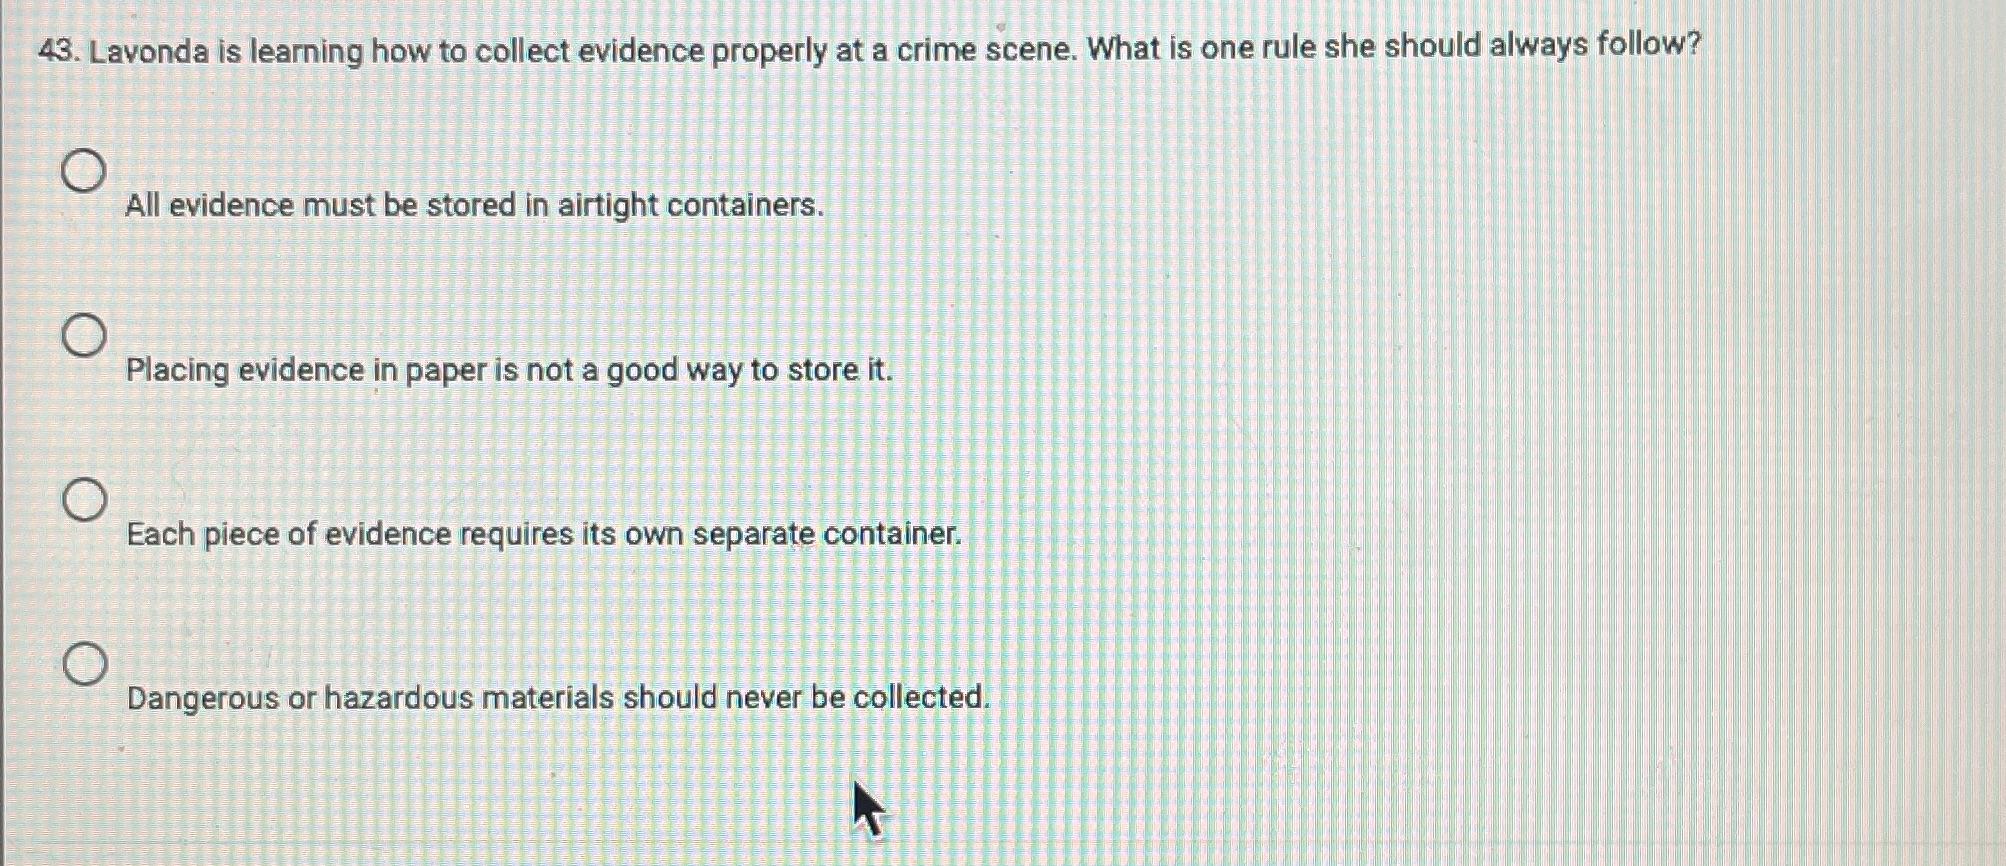 43. Lavonda is learning how to collect evidence properly at a crime scene. What is one rule she should always